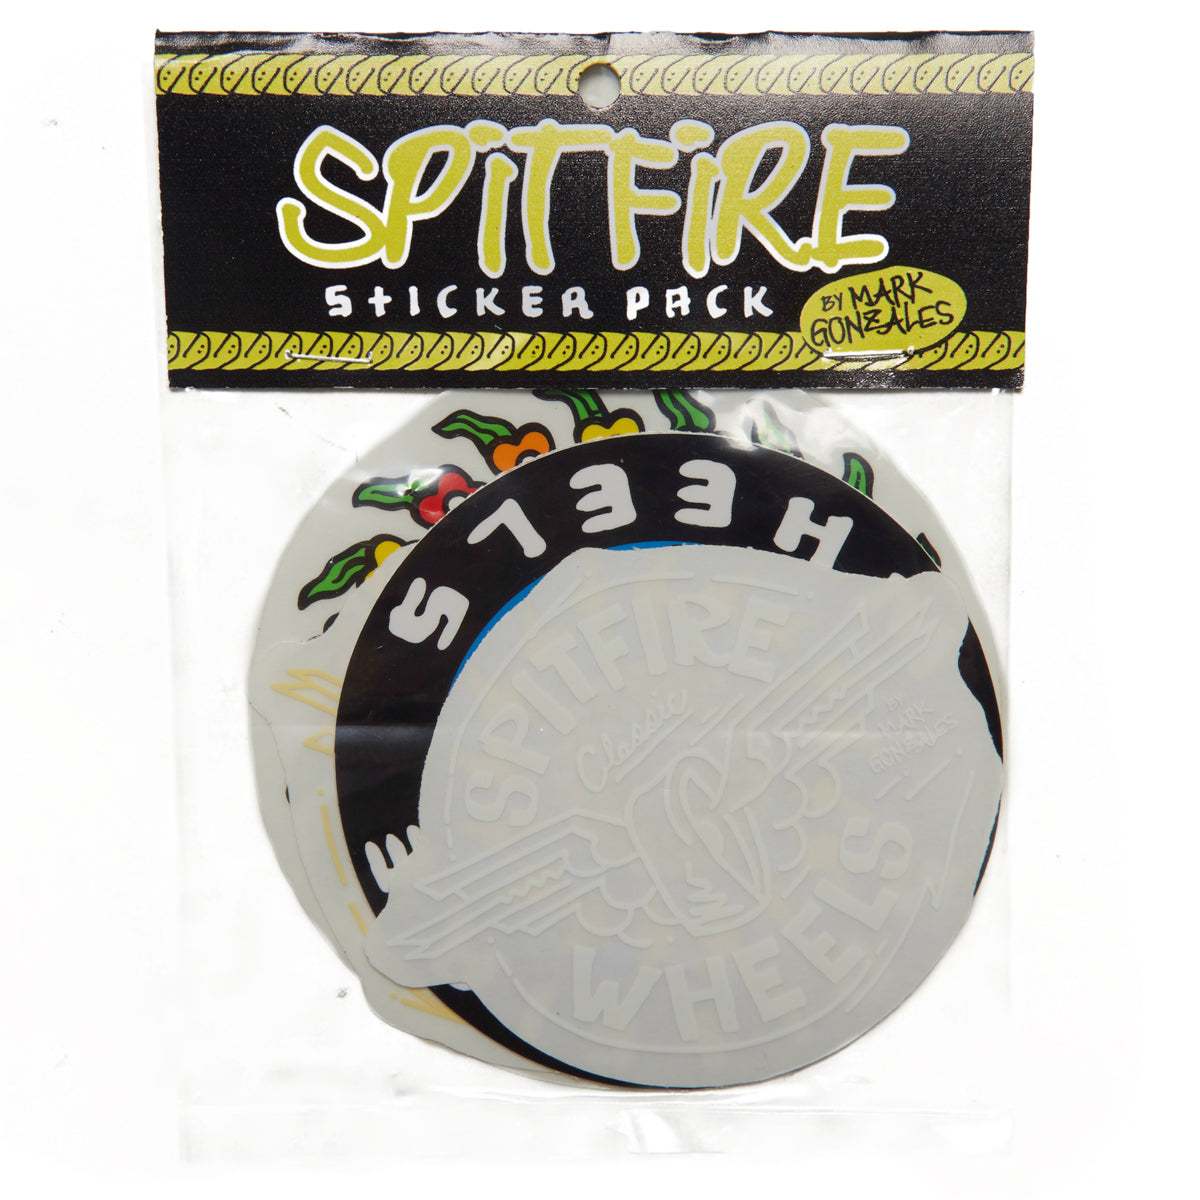 Spitfire 5 Pack By Gonz Stickers image 2